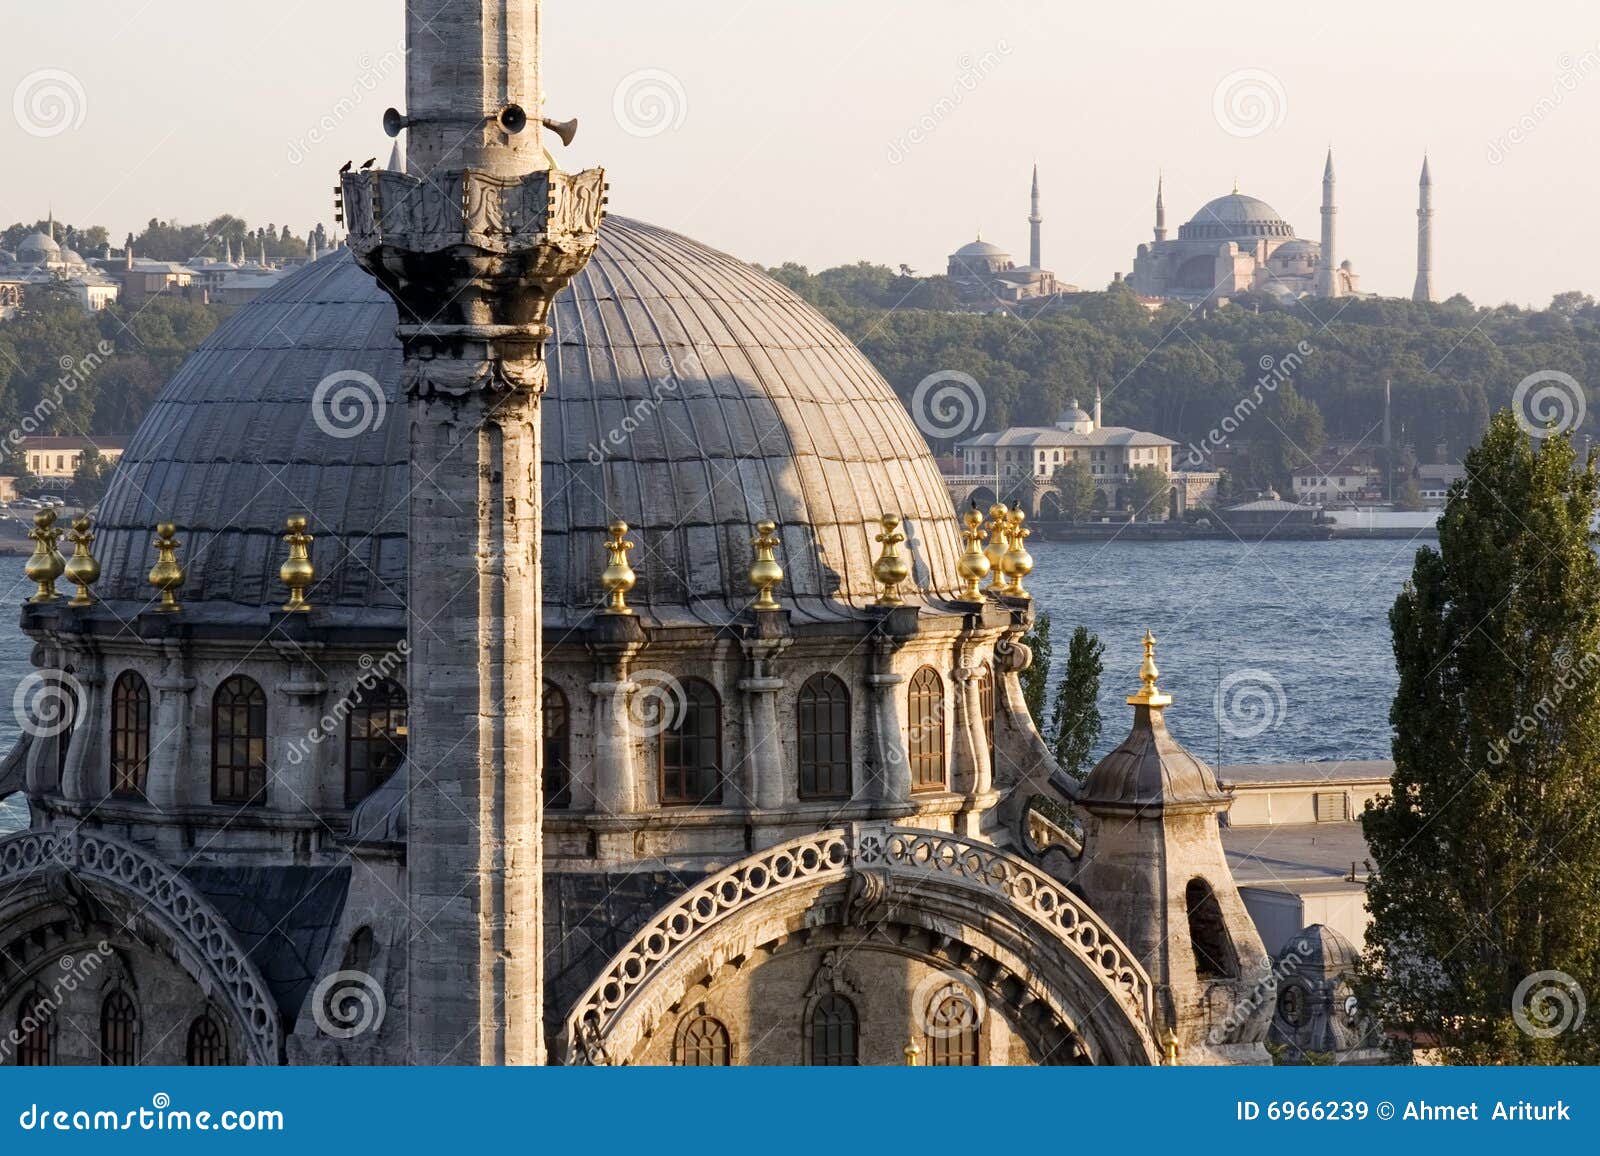 mosques of the istanbul